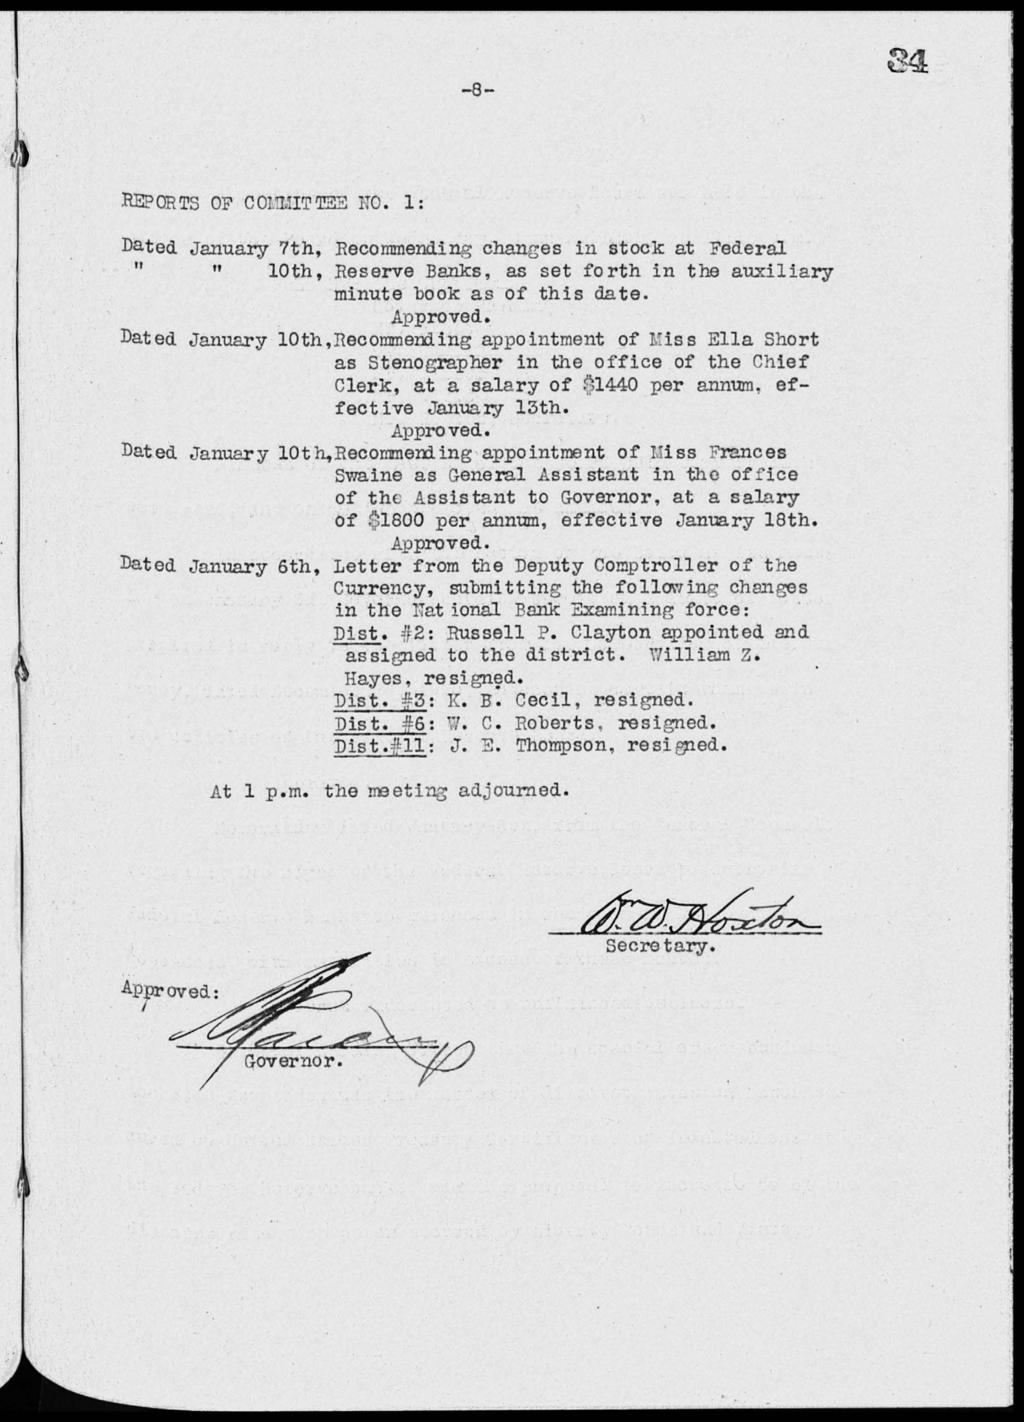 -8- R.ZORTS OF COMITTP-42 NO. 1: Dated January 7th, Recommending changes in stock at Federal 10th, Reserve Banks, as set forth in the auxiliary minute book as of this date.